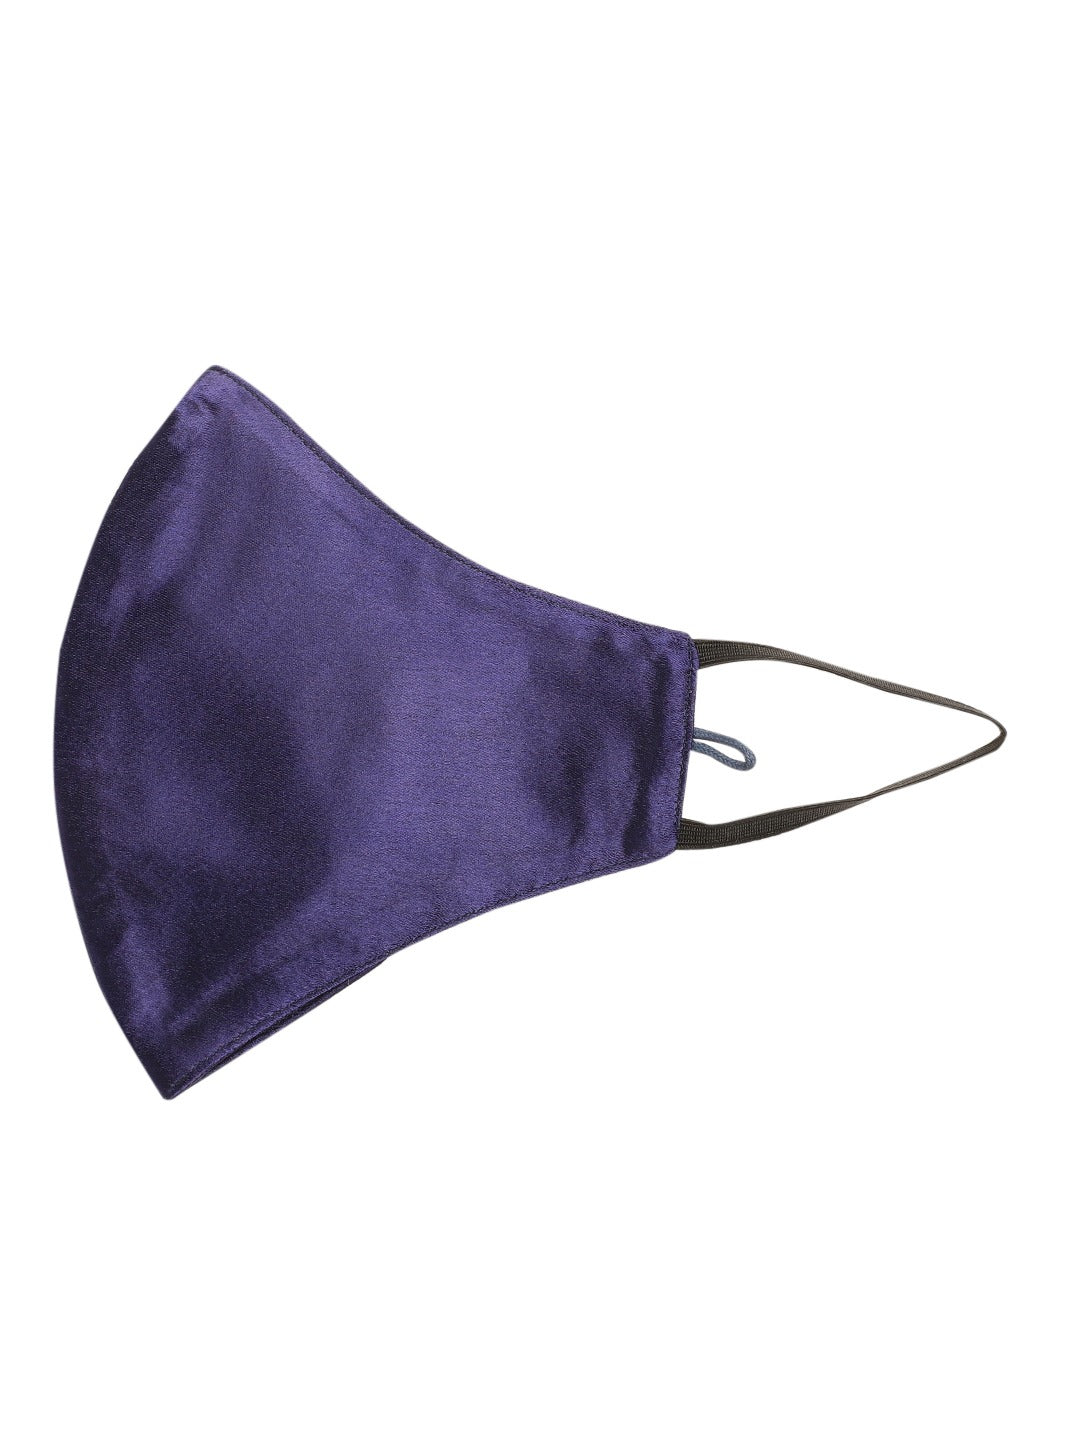 Blueberry navy blue Reusable 2-Ply satin face mask with blue chain